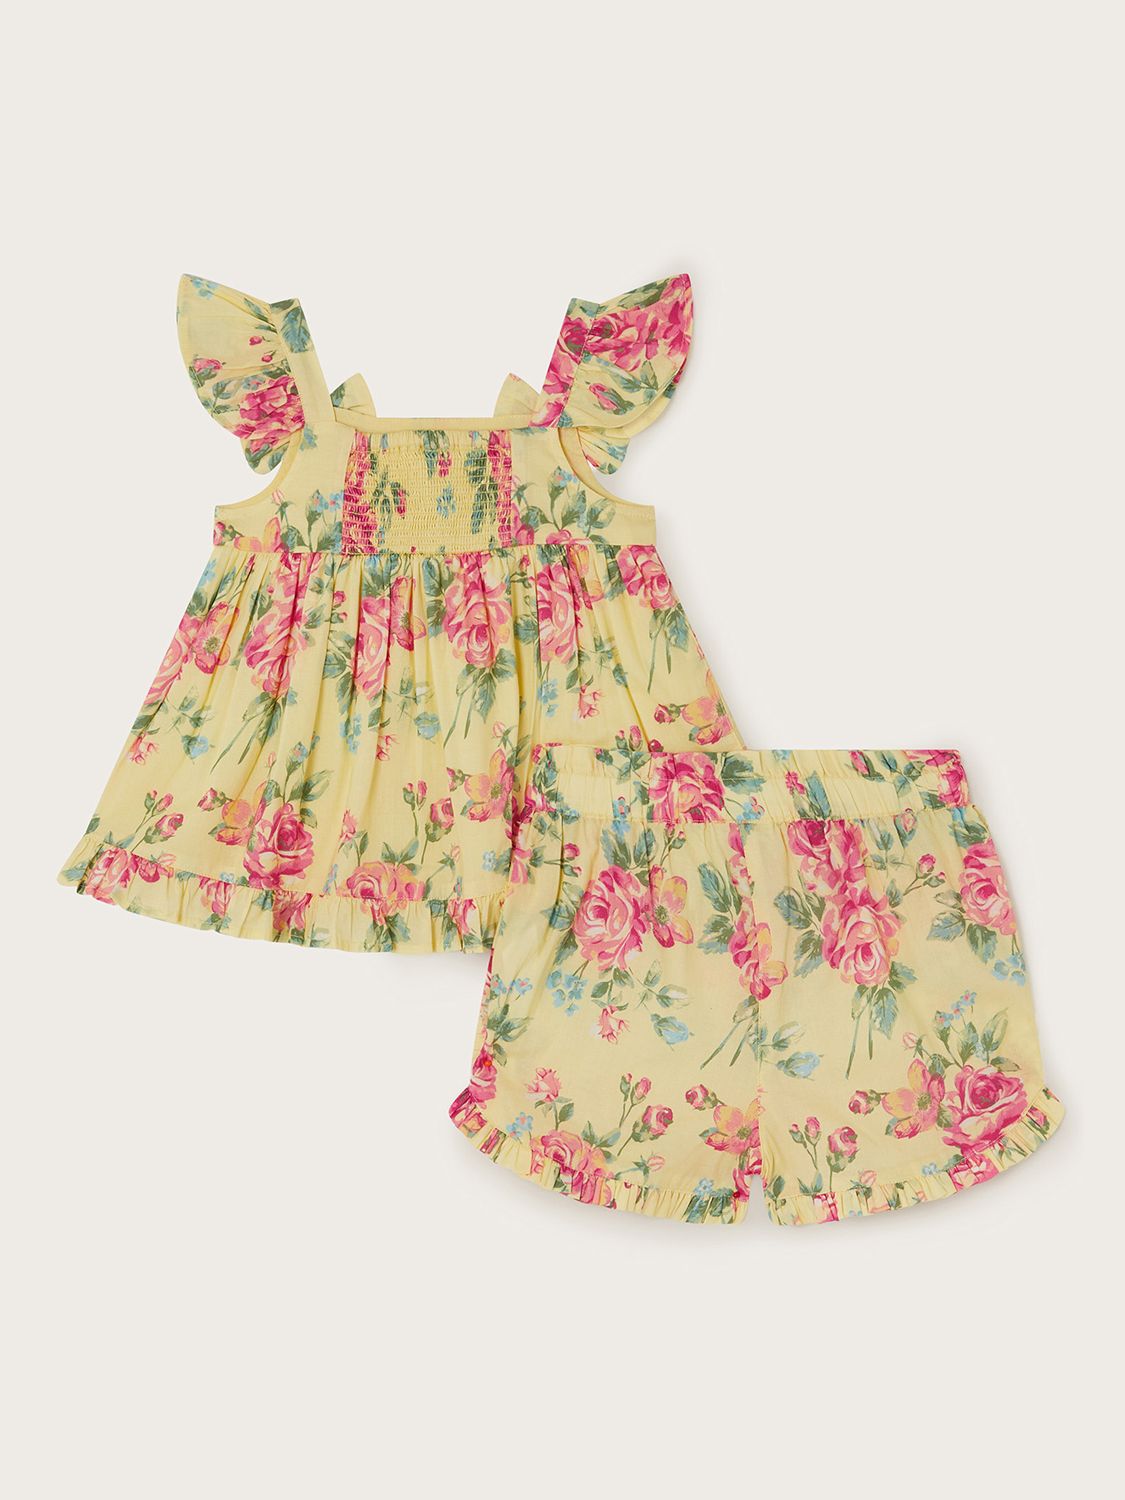 Monsoon Baby Floral Frill Top & Shorts Set, Yellow, 0-3 months